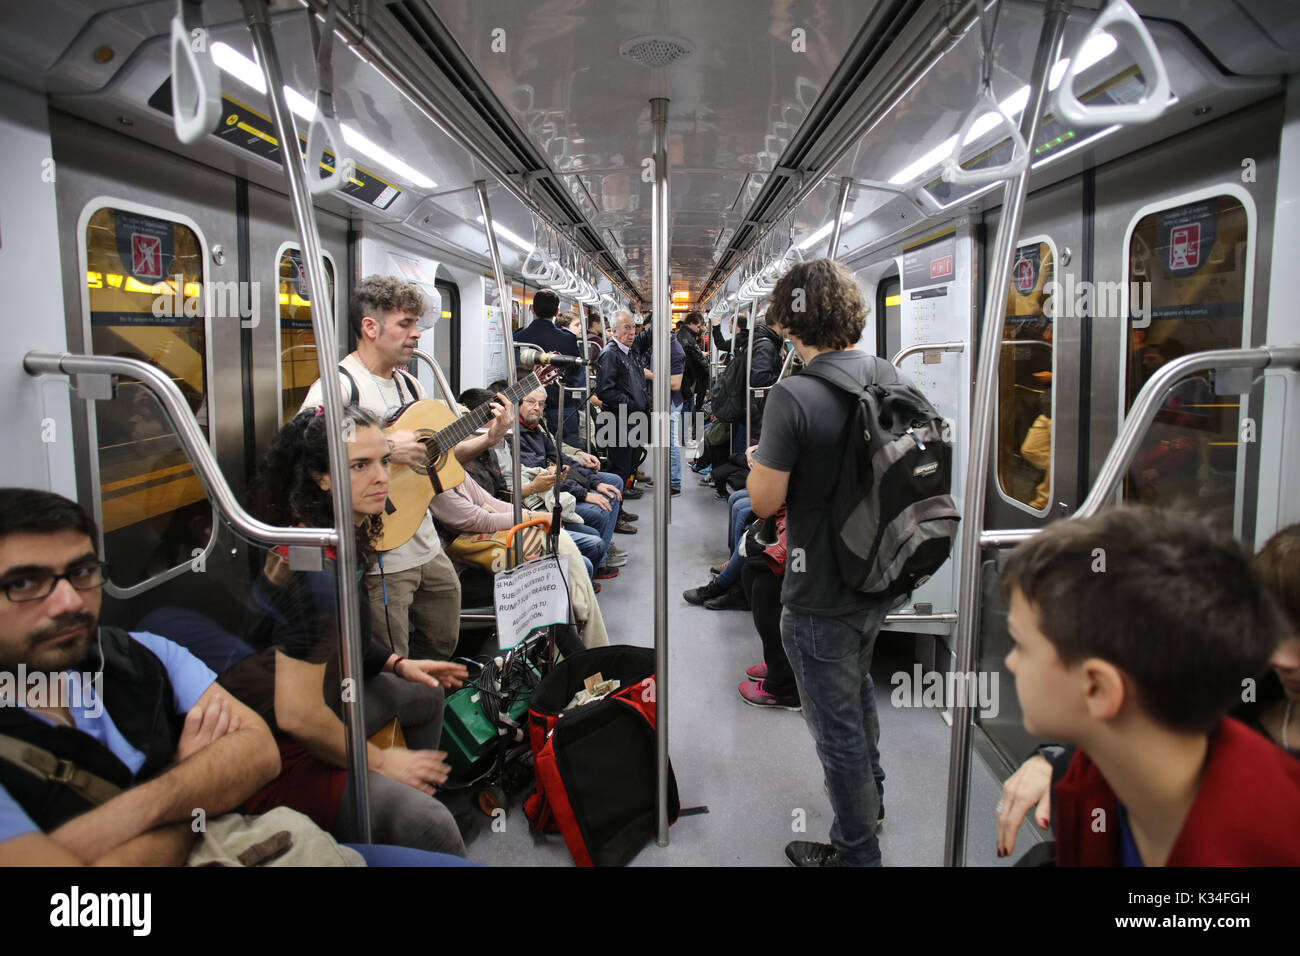 LINE D, BUENOS AIRES, ARGENTINA - SEPTEMBER 2017 - A band called â€˜â€™Rumbo Subterraneoâ€™â€™ plays in the subway train for money. Unidentified peopl Stock Photo